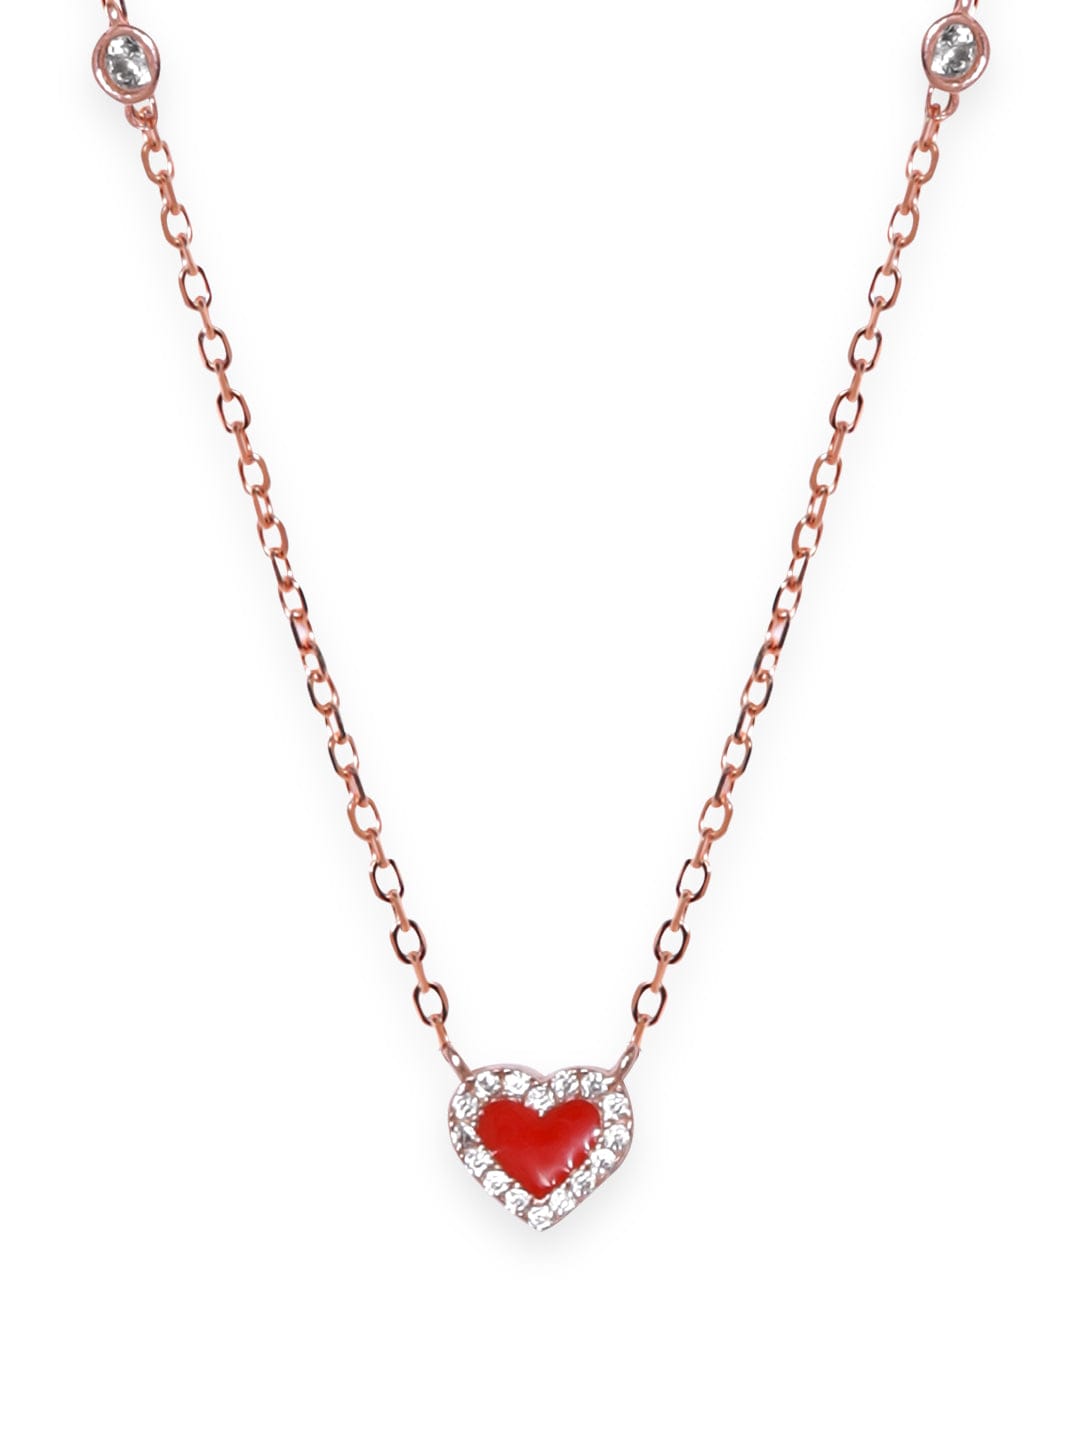 Rubans 925 Silver 18K Rose Gold Plated Red Heart Studded Charm Necklace Necklaces, Necklace Sets, Chains & Mangalsutra